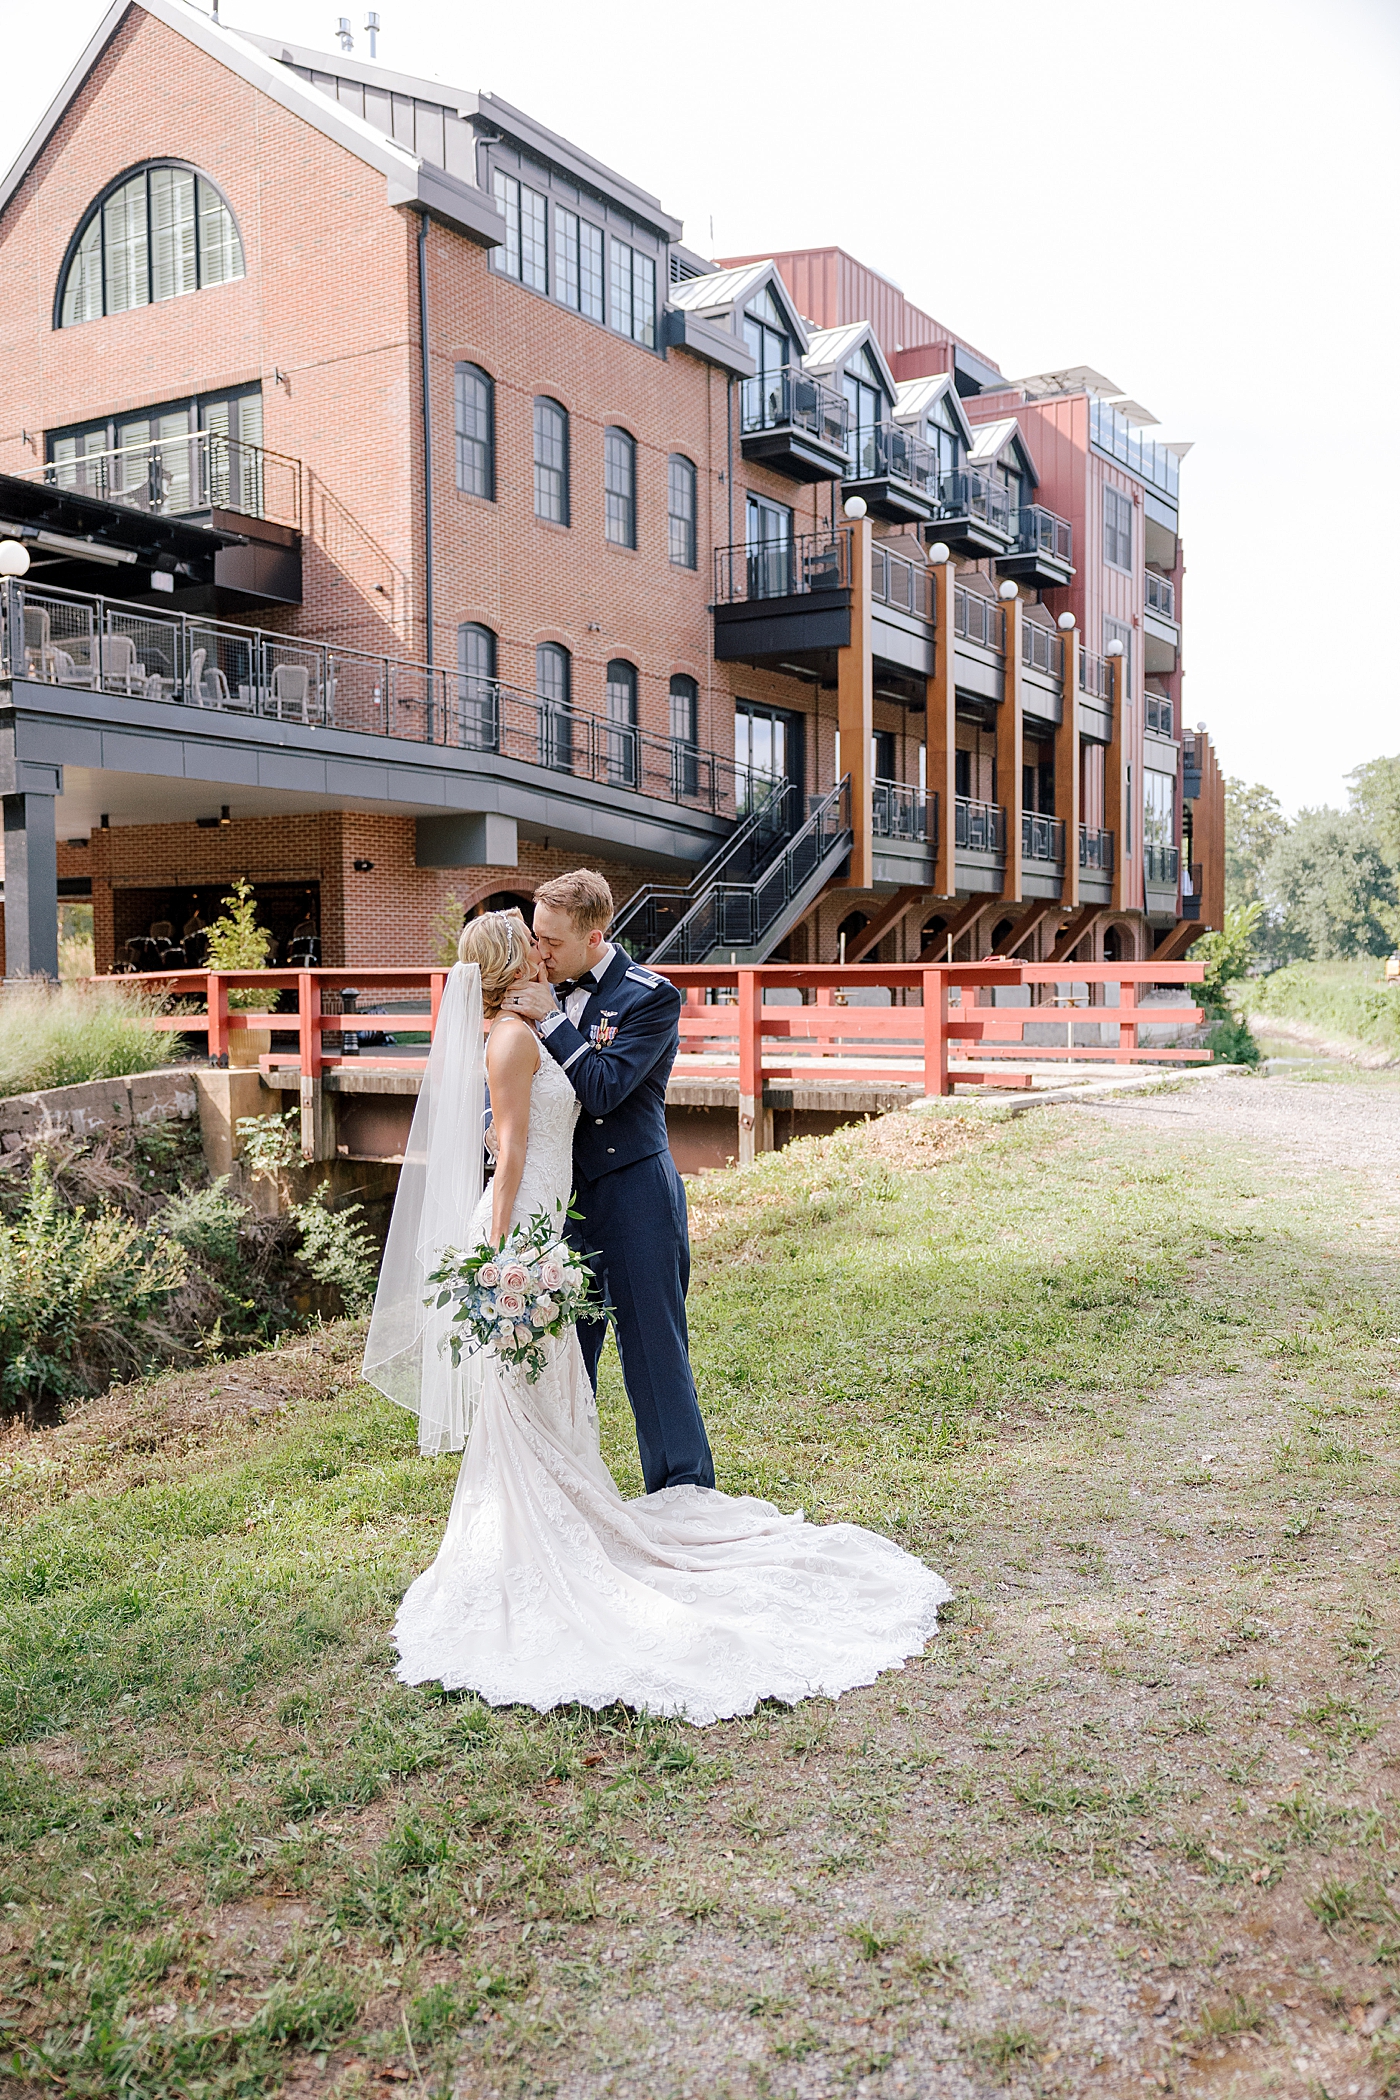 Bride and groom kiss in front of wedding venue | Image by Hope Helmuth Photography